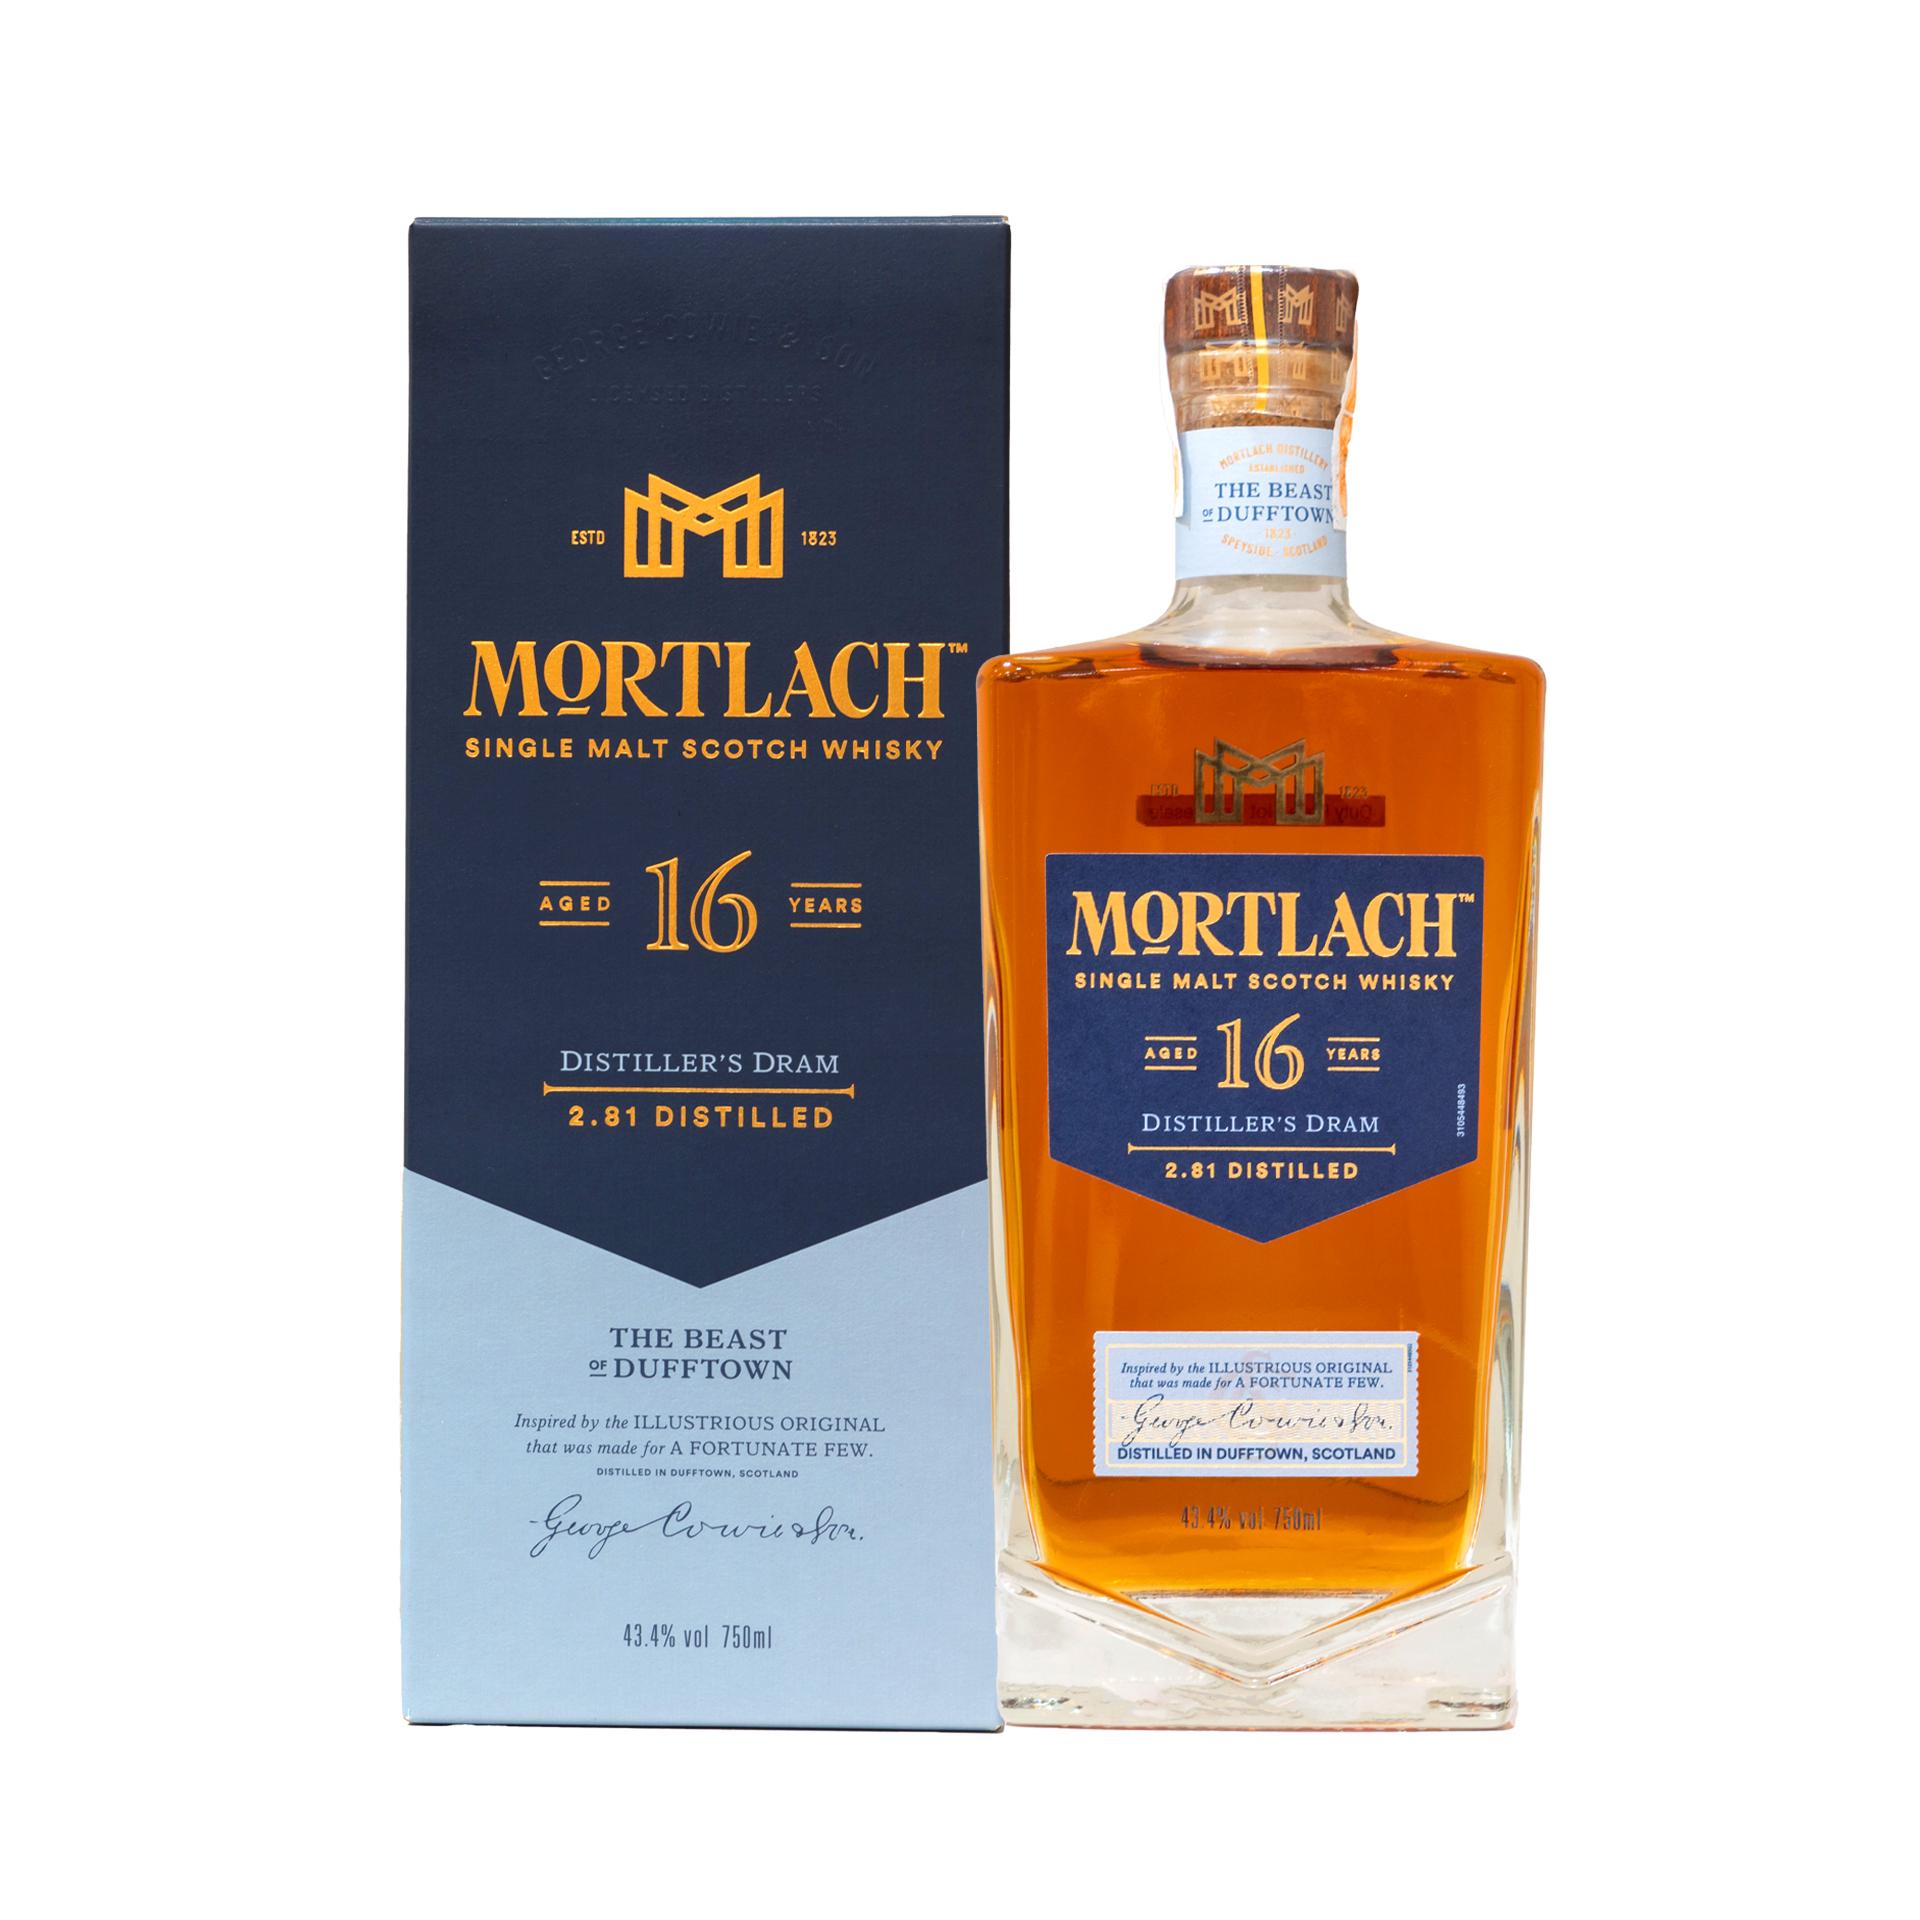 Mortlach 16 years old (750ml)